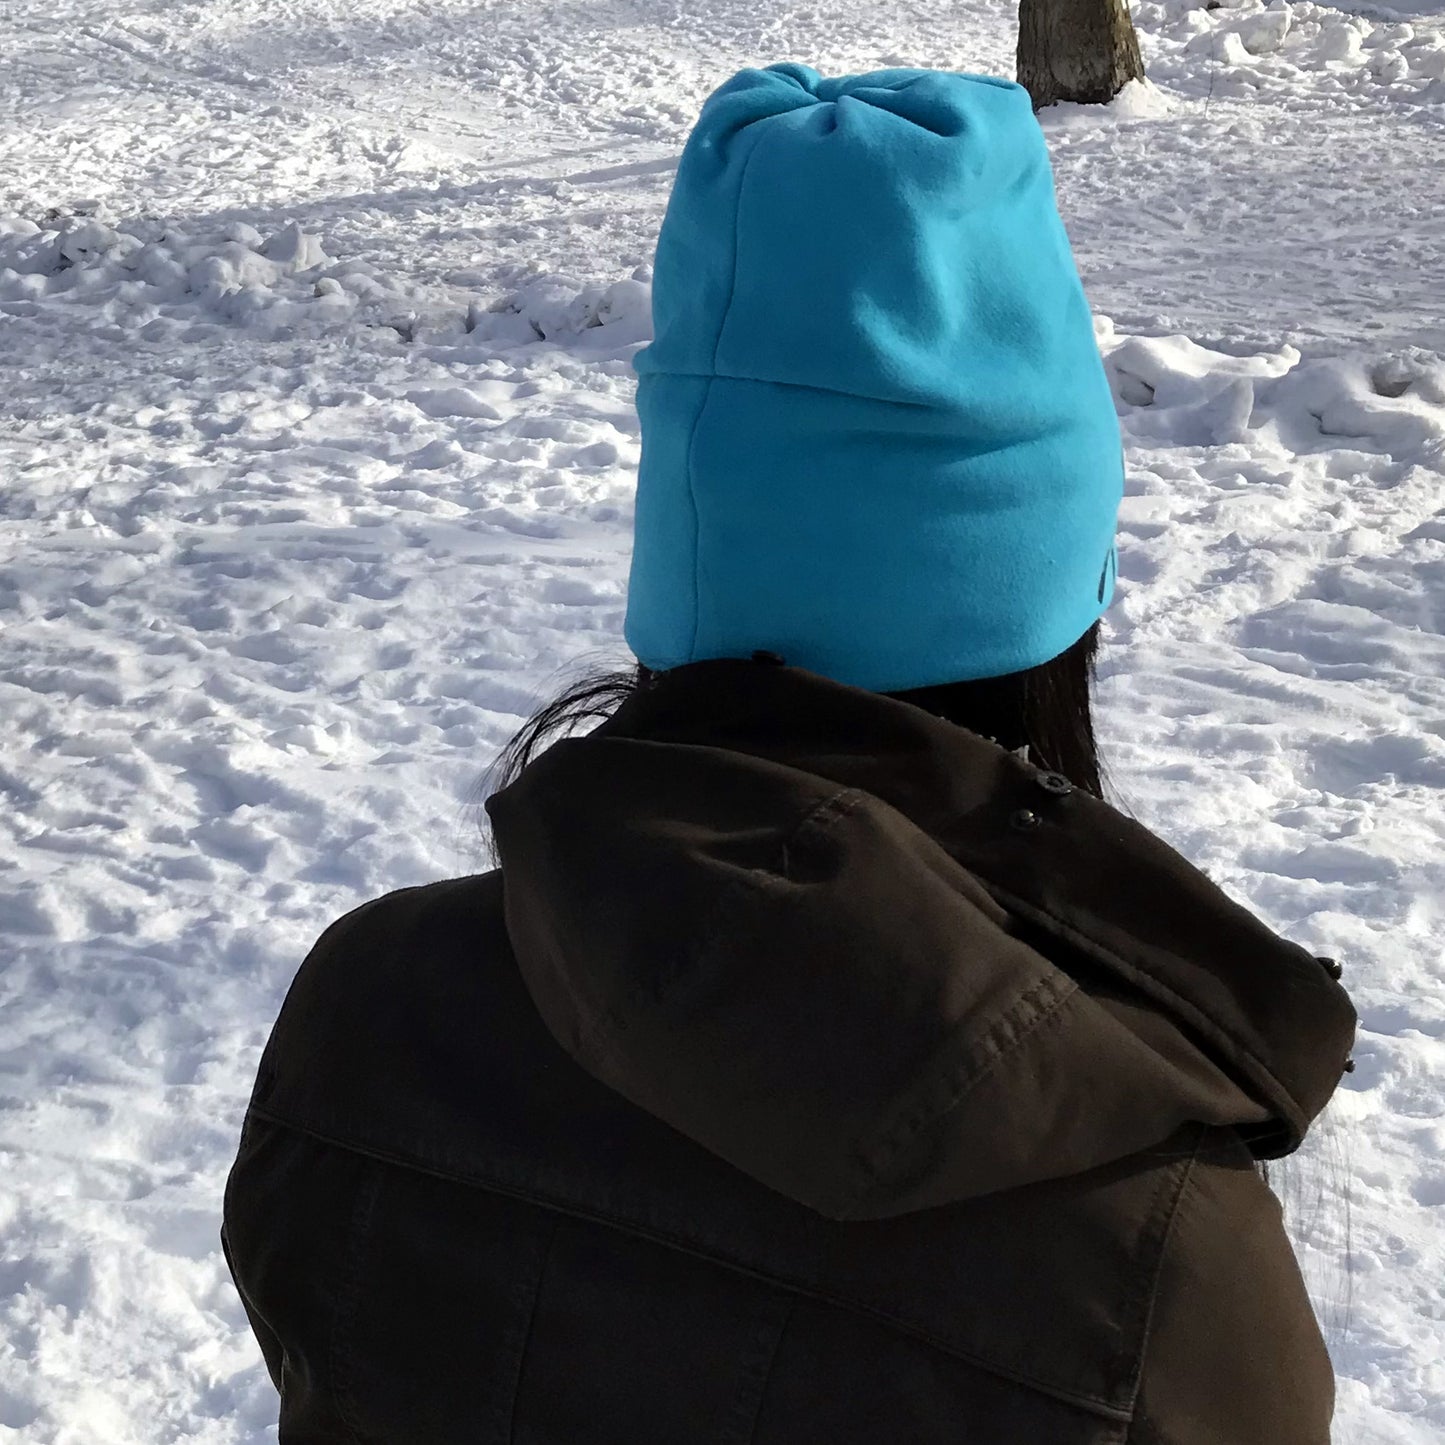 Sparrow Bird Slouchy Toque Hat Turquoise Blue